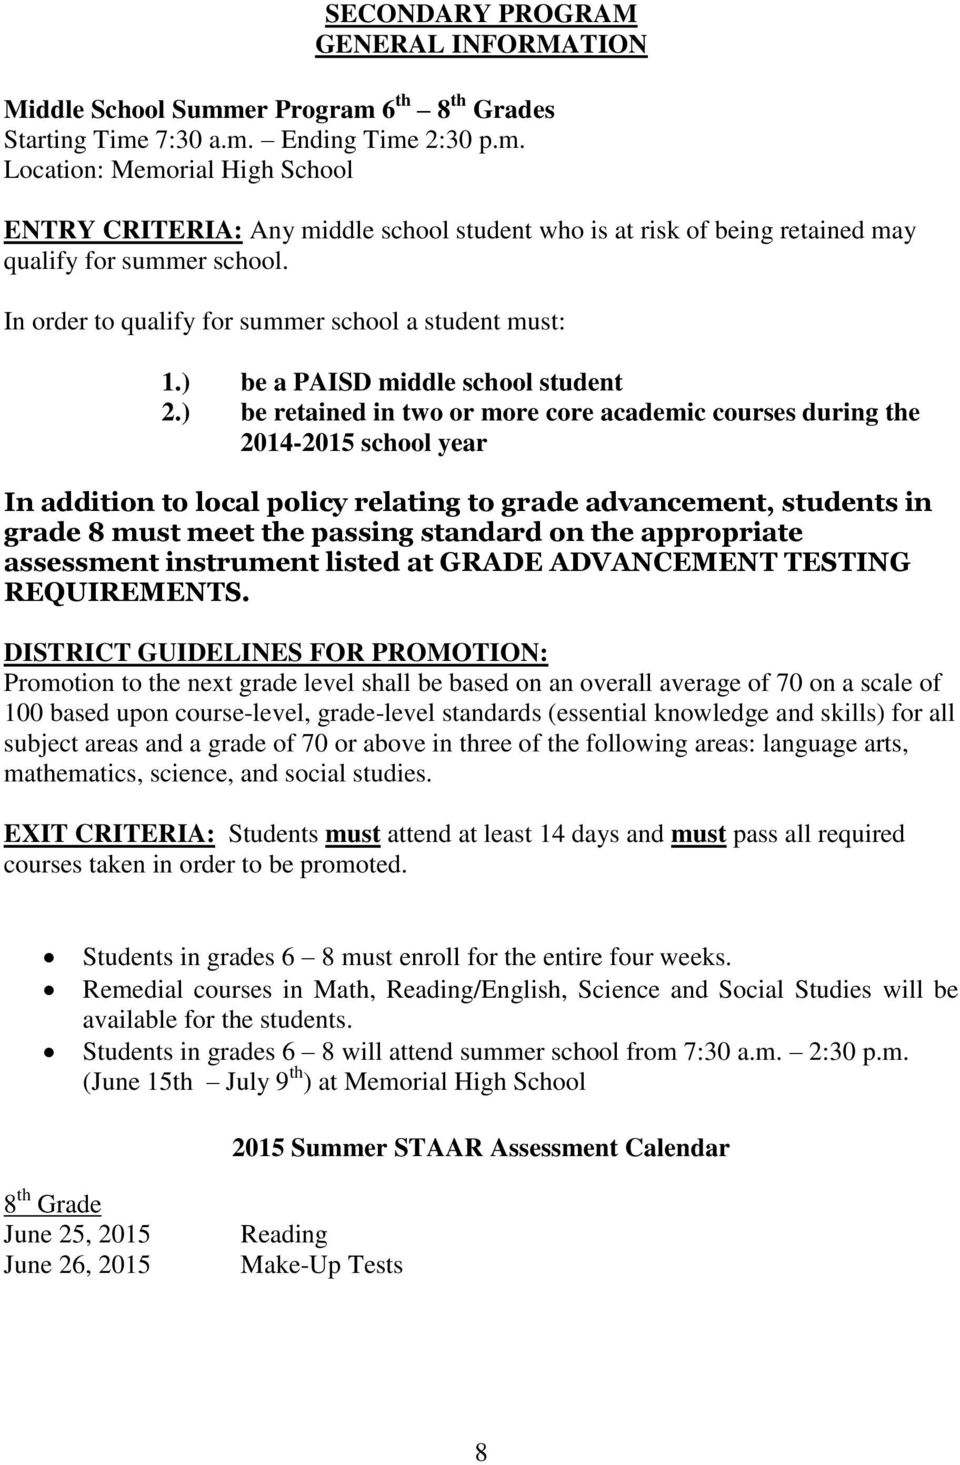 ) be retained in two or more core academic courses during the 2014-2015 school year In addition to local policy relating to grade advancement, students in grade 8 must meet the passing standard on